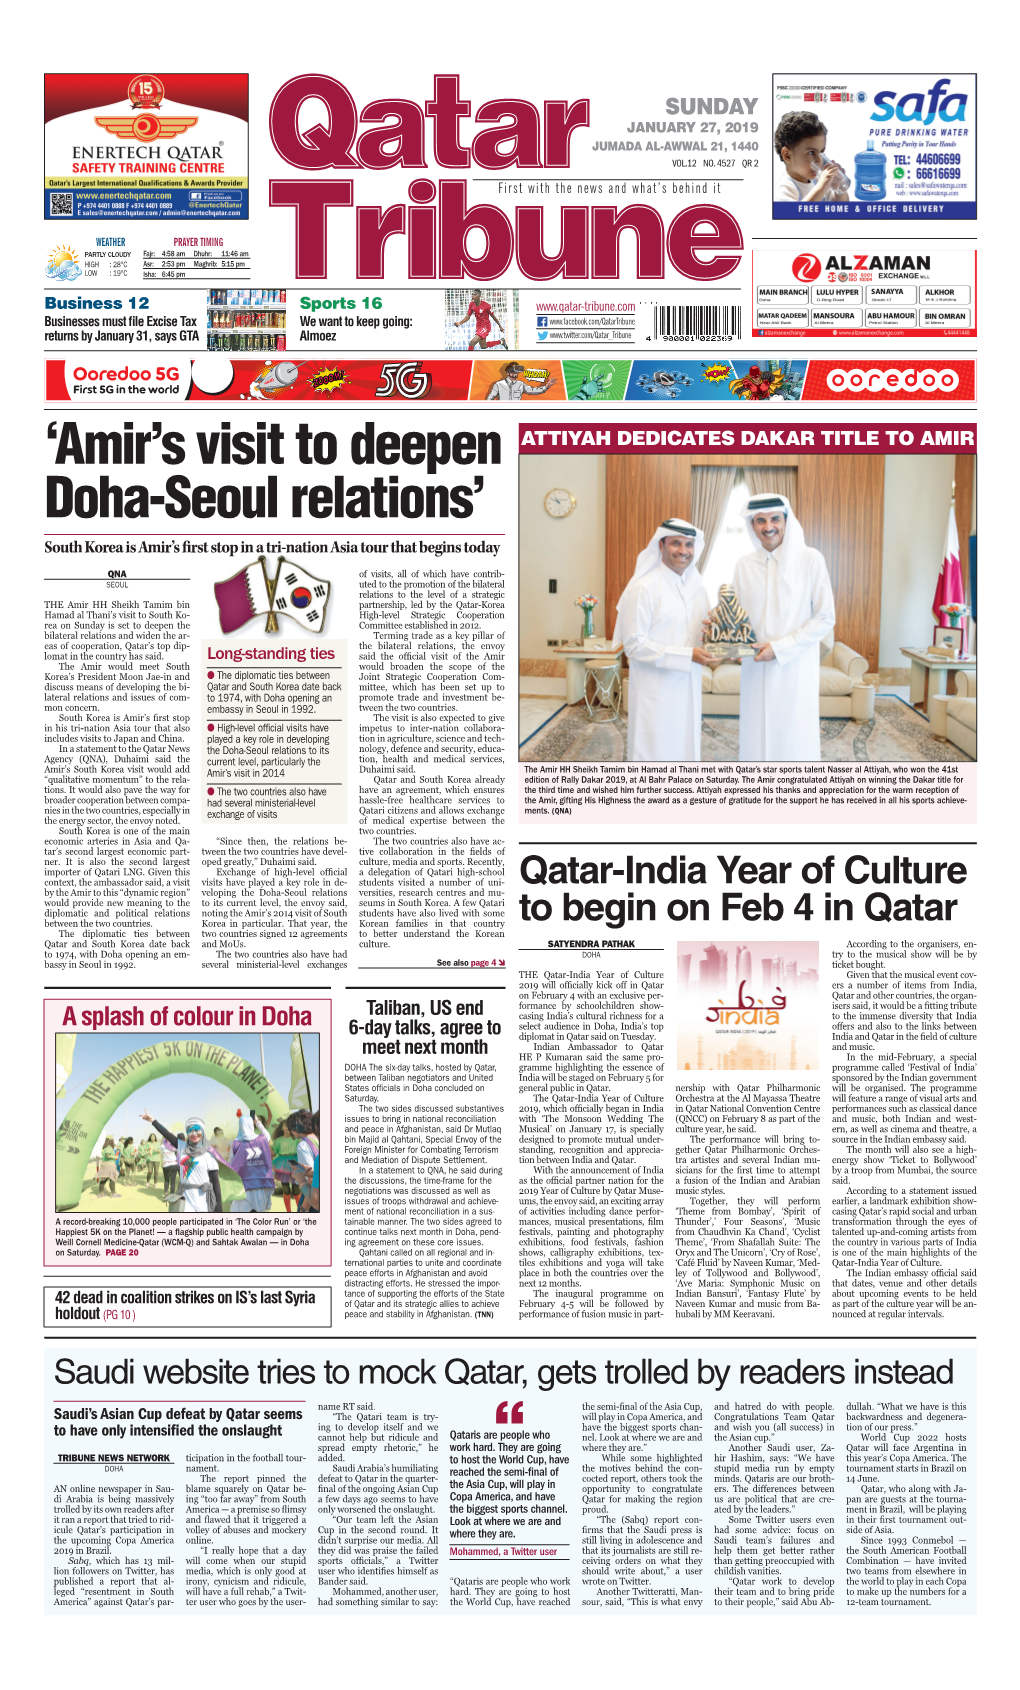 'Amir's Visit to Deepen Doha-Seoul Relations'